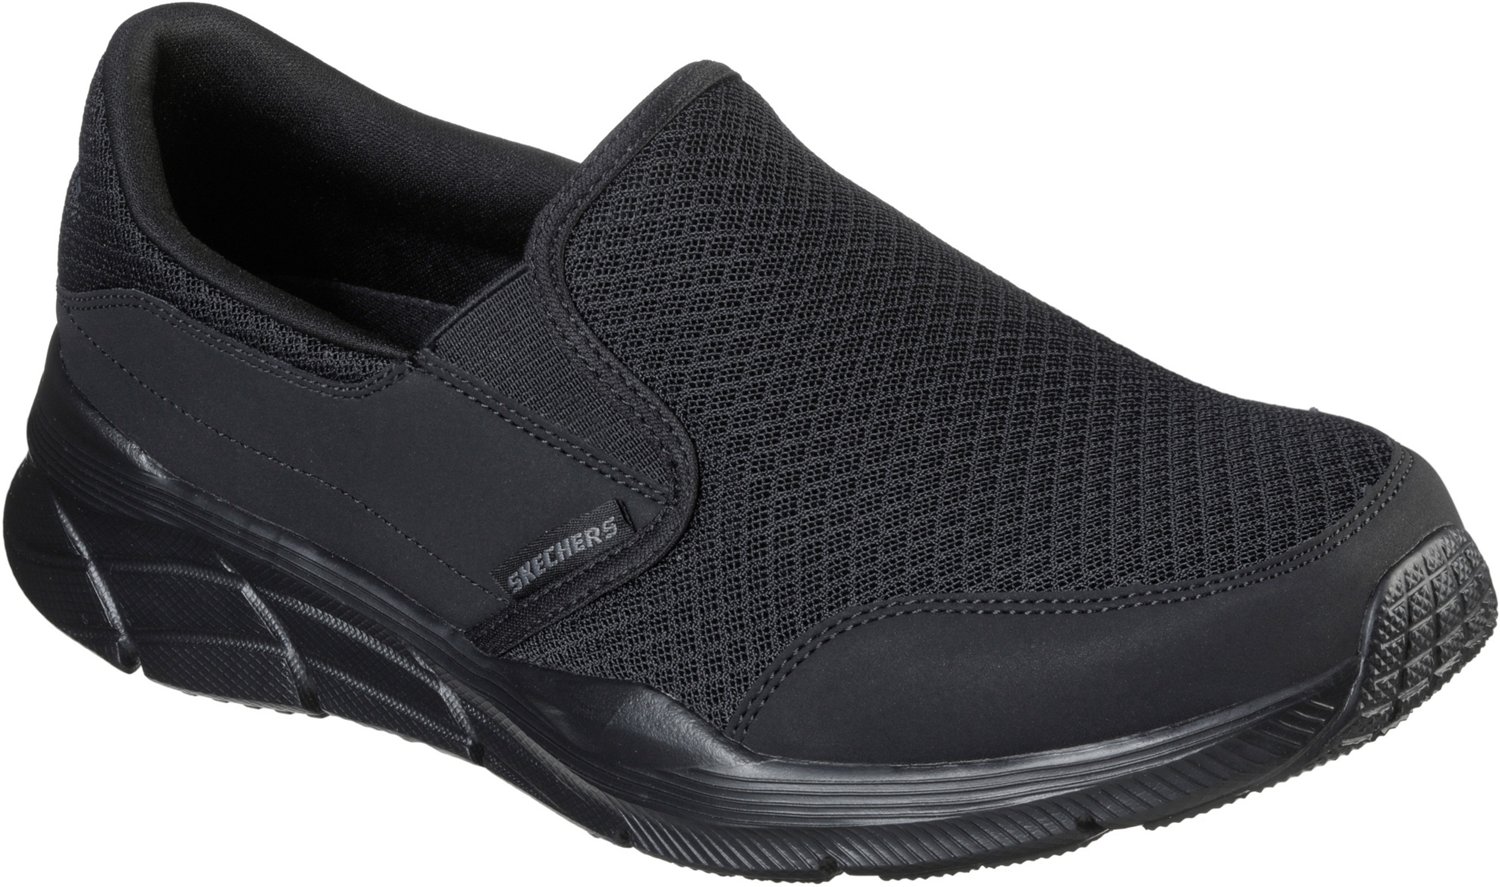 SKECHERS Men's Equalizer 4.0 Persisting Relaxed Fit Slip On Shoes | Academy